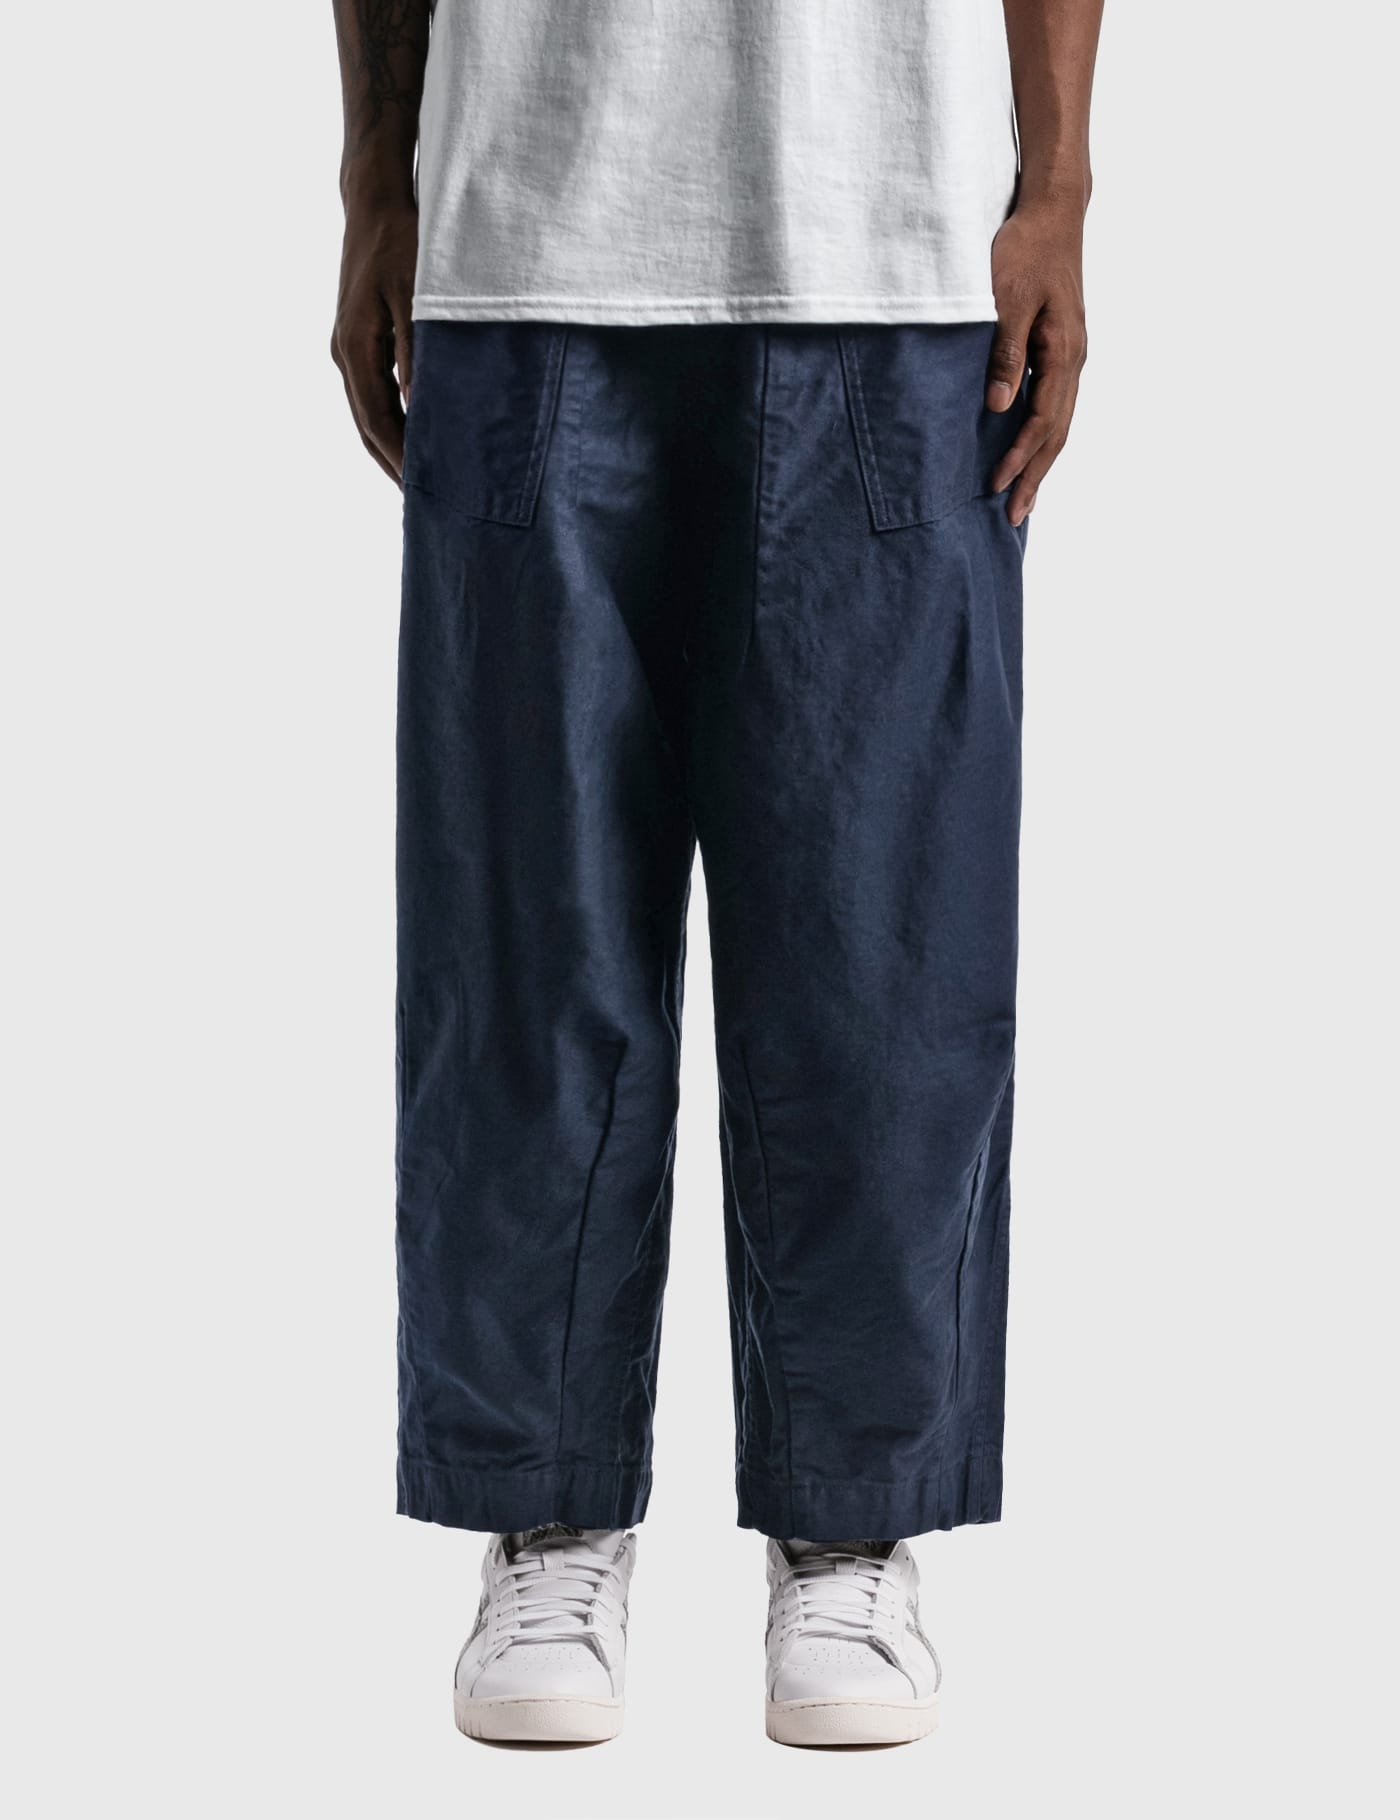 Needles - Fatigue H.D. Pants | HBX - Globally Curated Fashion and 